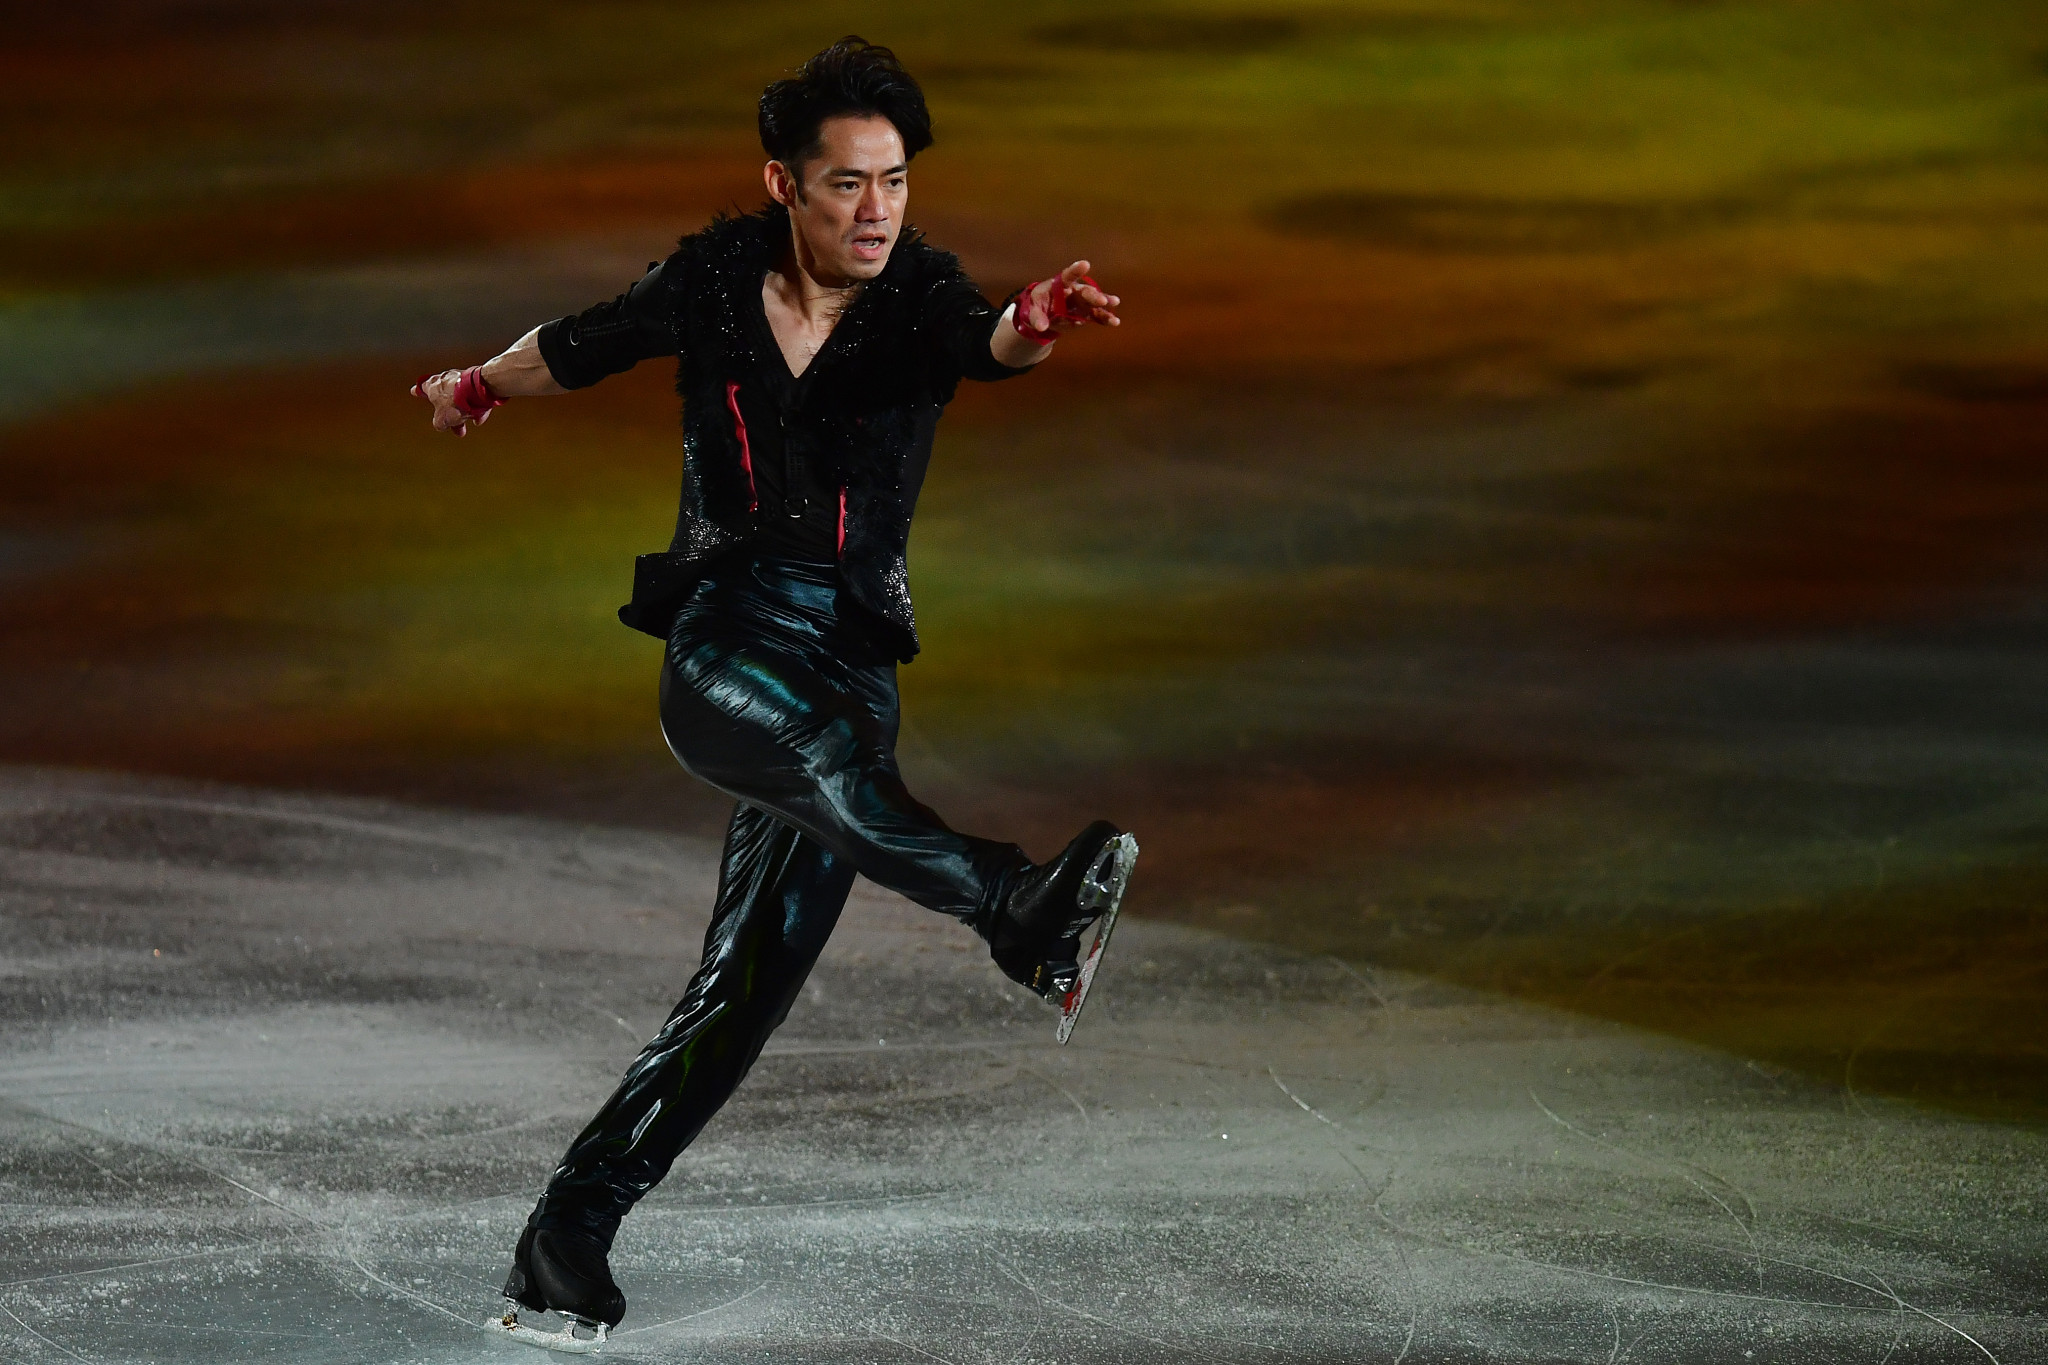 Takahashi to make ice dance debut at Grand Prix of Figure Skating event in Osaka